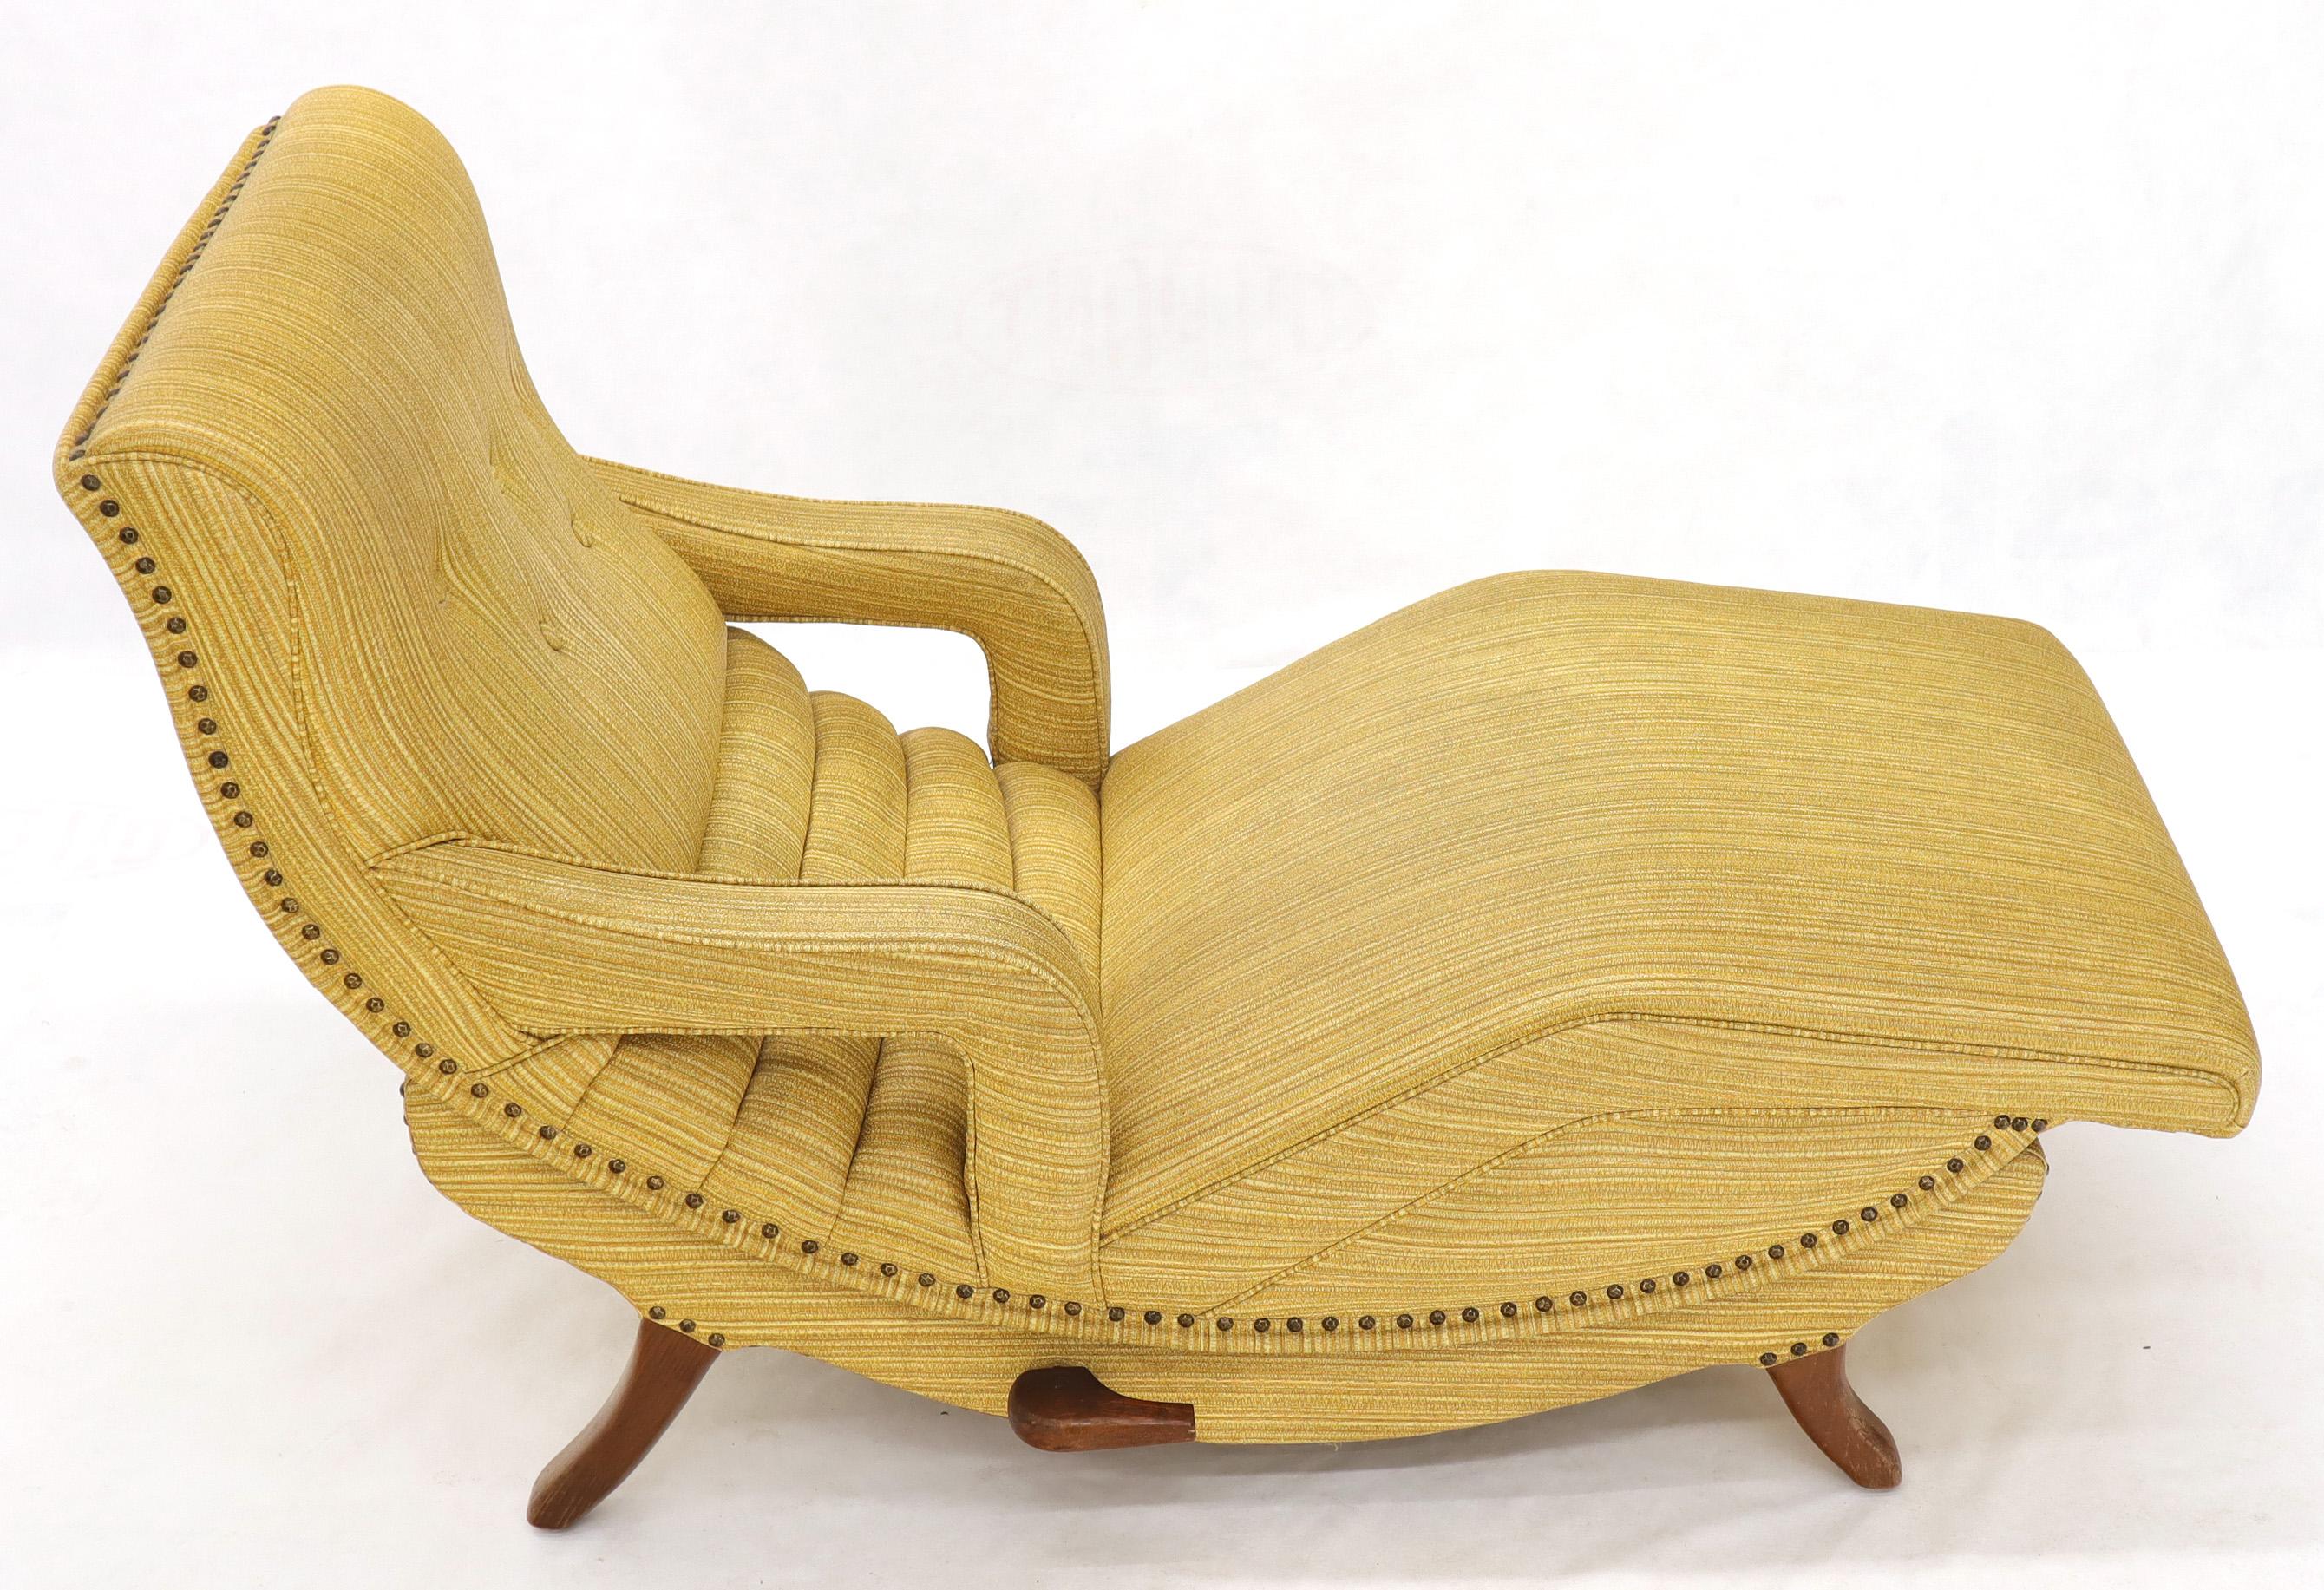 Mid-Century Modern adjustable chaise lounge chair. Original gold to yellow textured vinyl upholstery. Solid wood legs/frame.